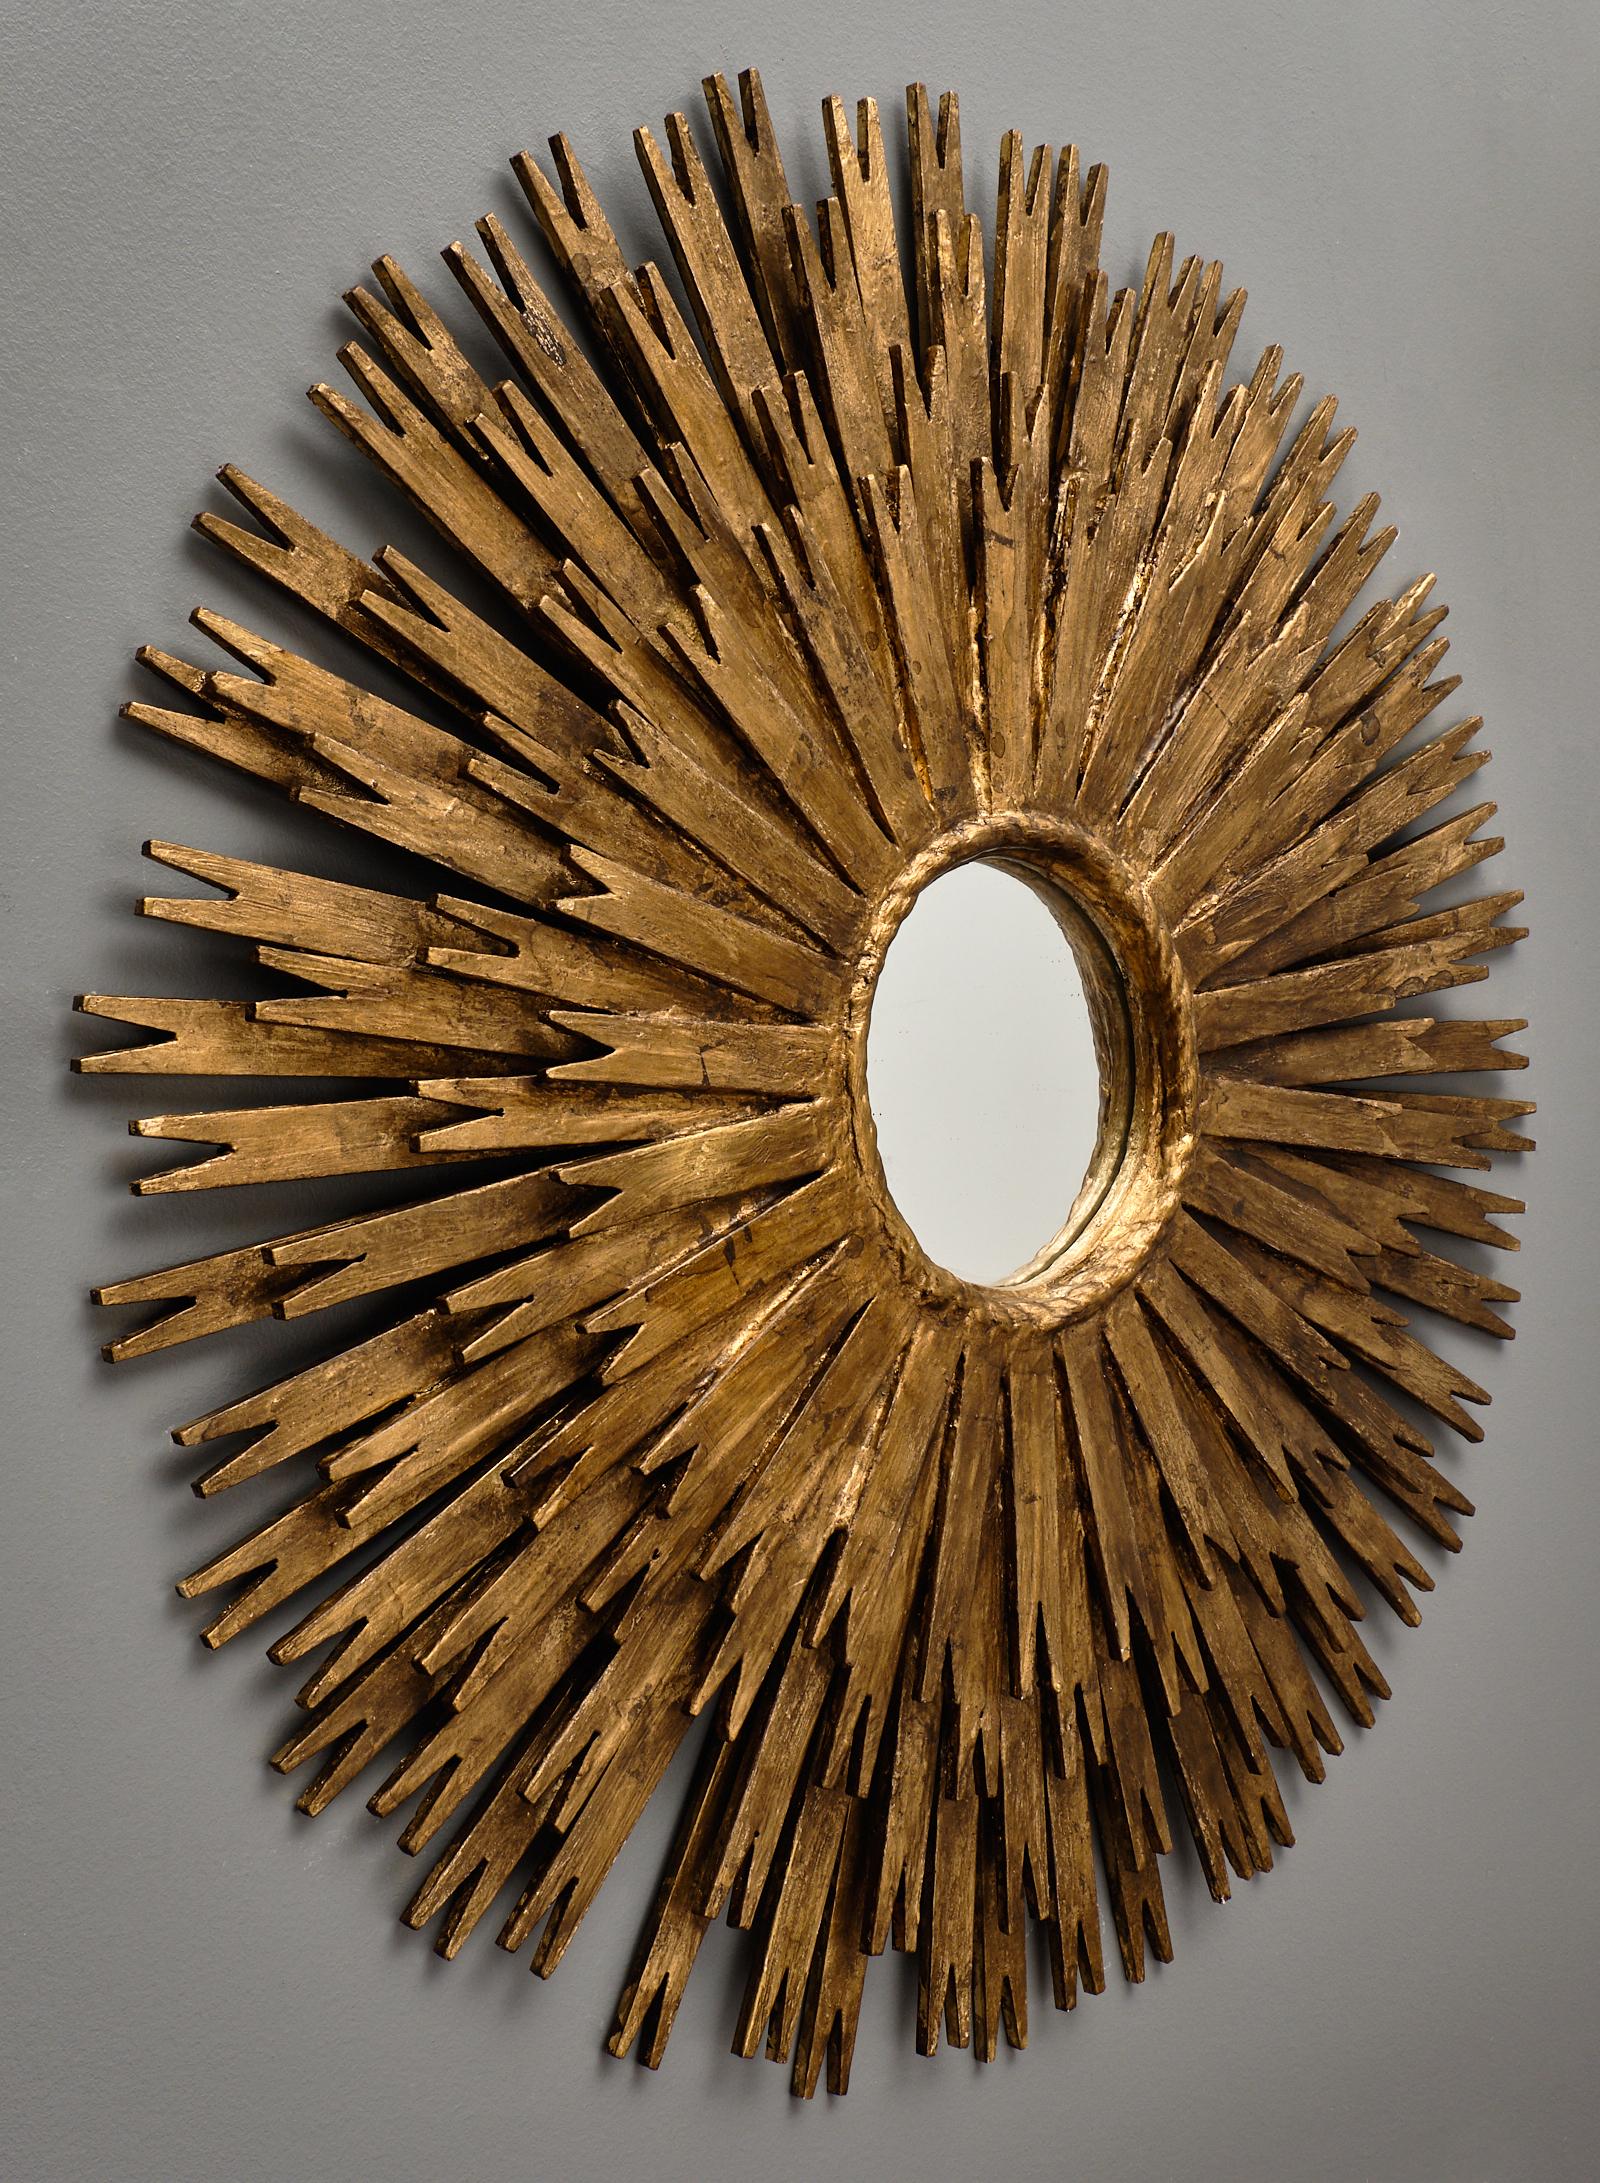 A vintage Spanish sunburst mirror featuring layers of hand carved and gold-leafed wooden rays. The round center mirror is framed by a twisted rope texture from which the rays originate.